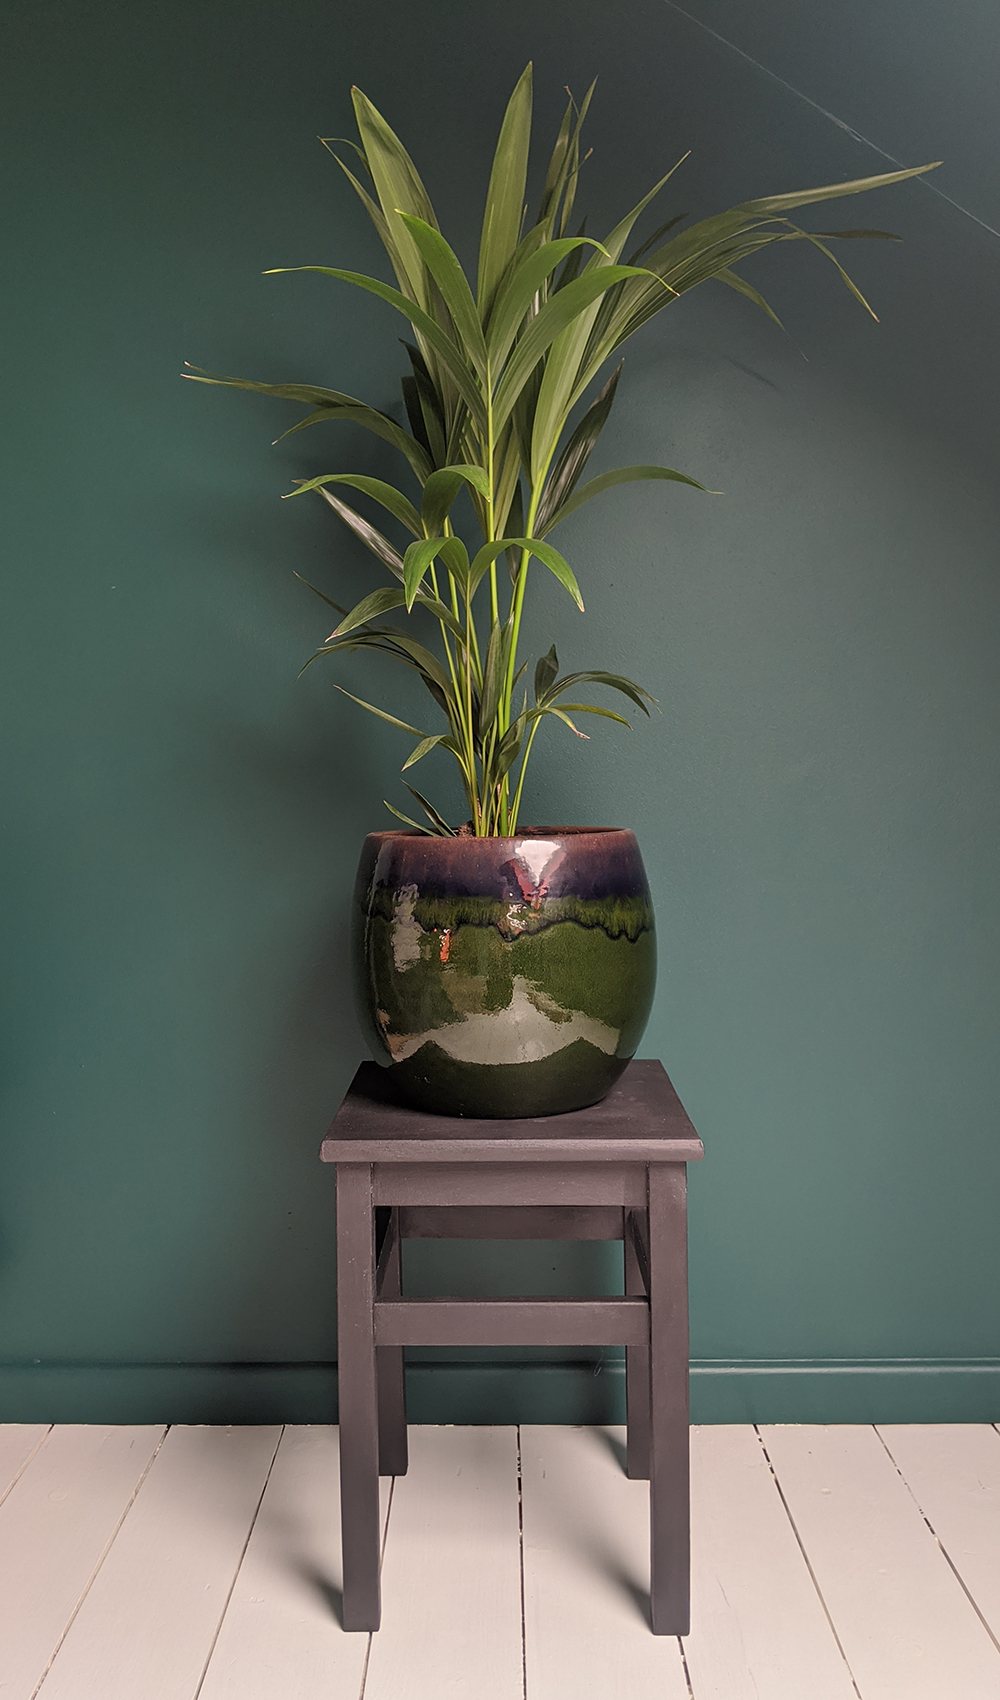 A photo of the newly painted plant stand, with a tall Kentia palm plant on it.